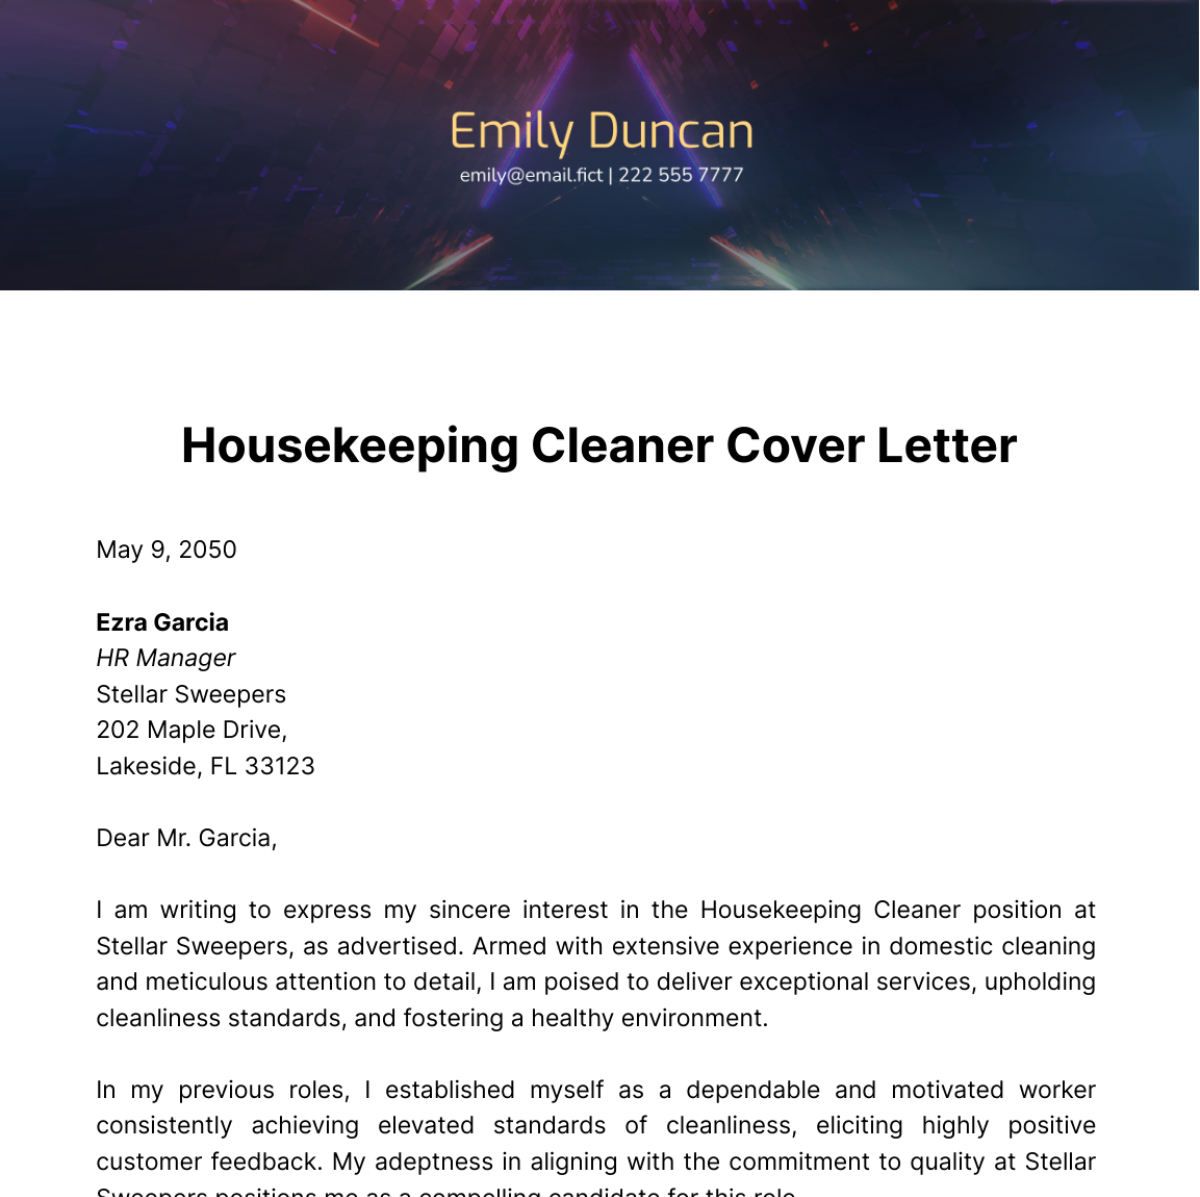 Housekeeping Cleaner Cover Letter Template